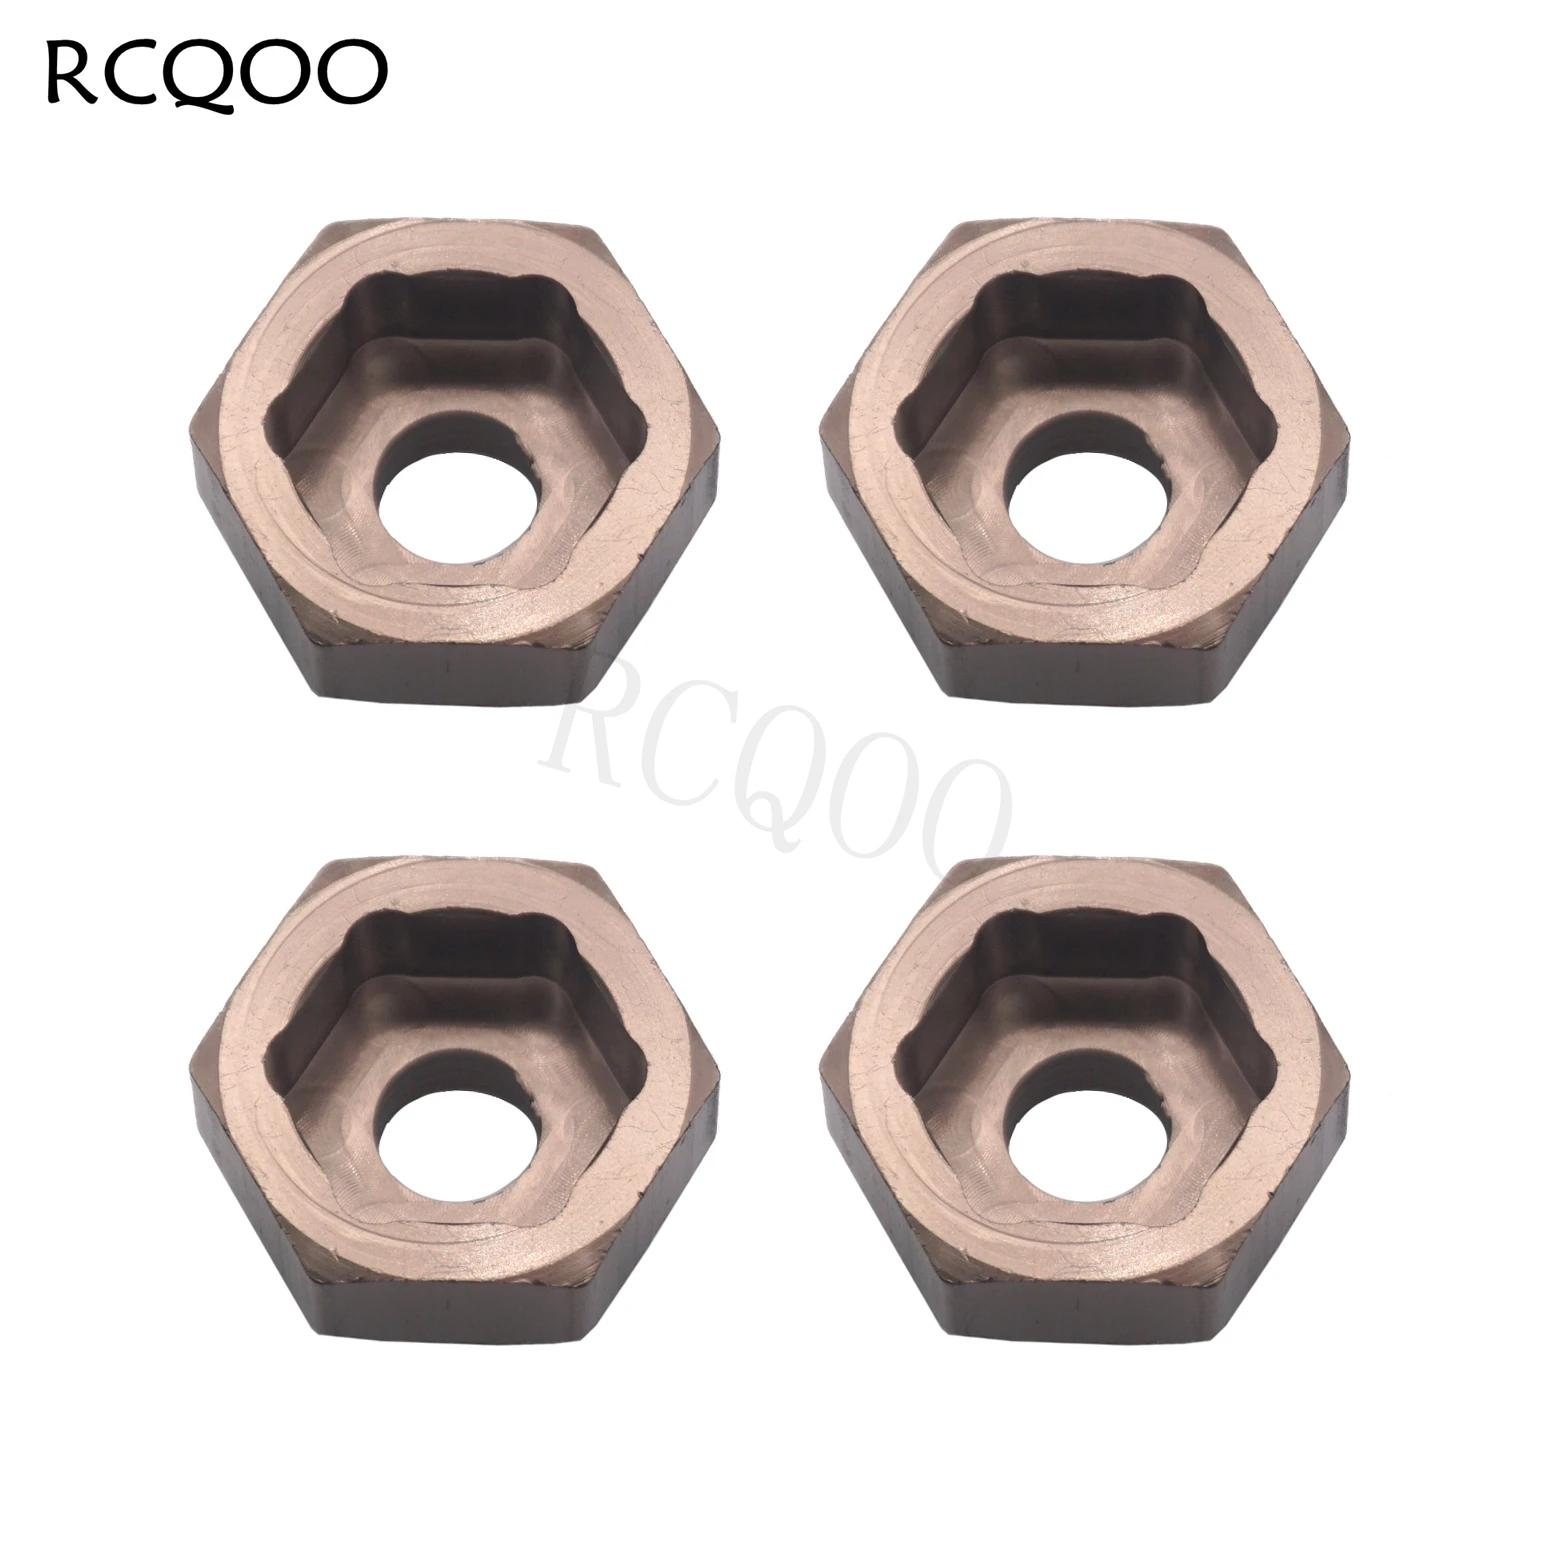 

4Pack 12mm to 17mm Metal Wheel Hex Adapter Drive Hub for Tamiya Axial Traxxas HPI Himoto HSP Losi Kyosho RC 1/10 On-Road Car